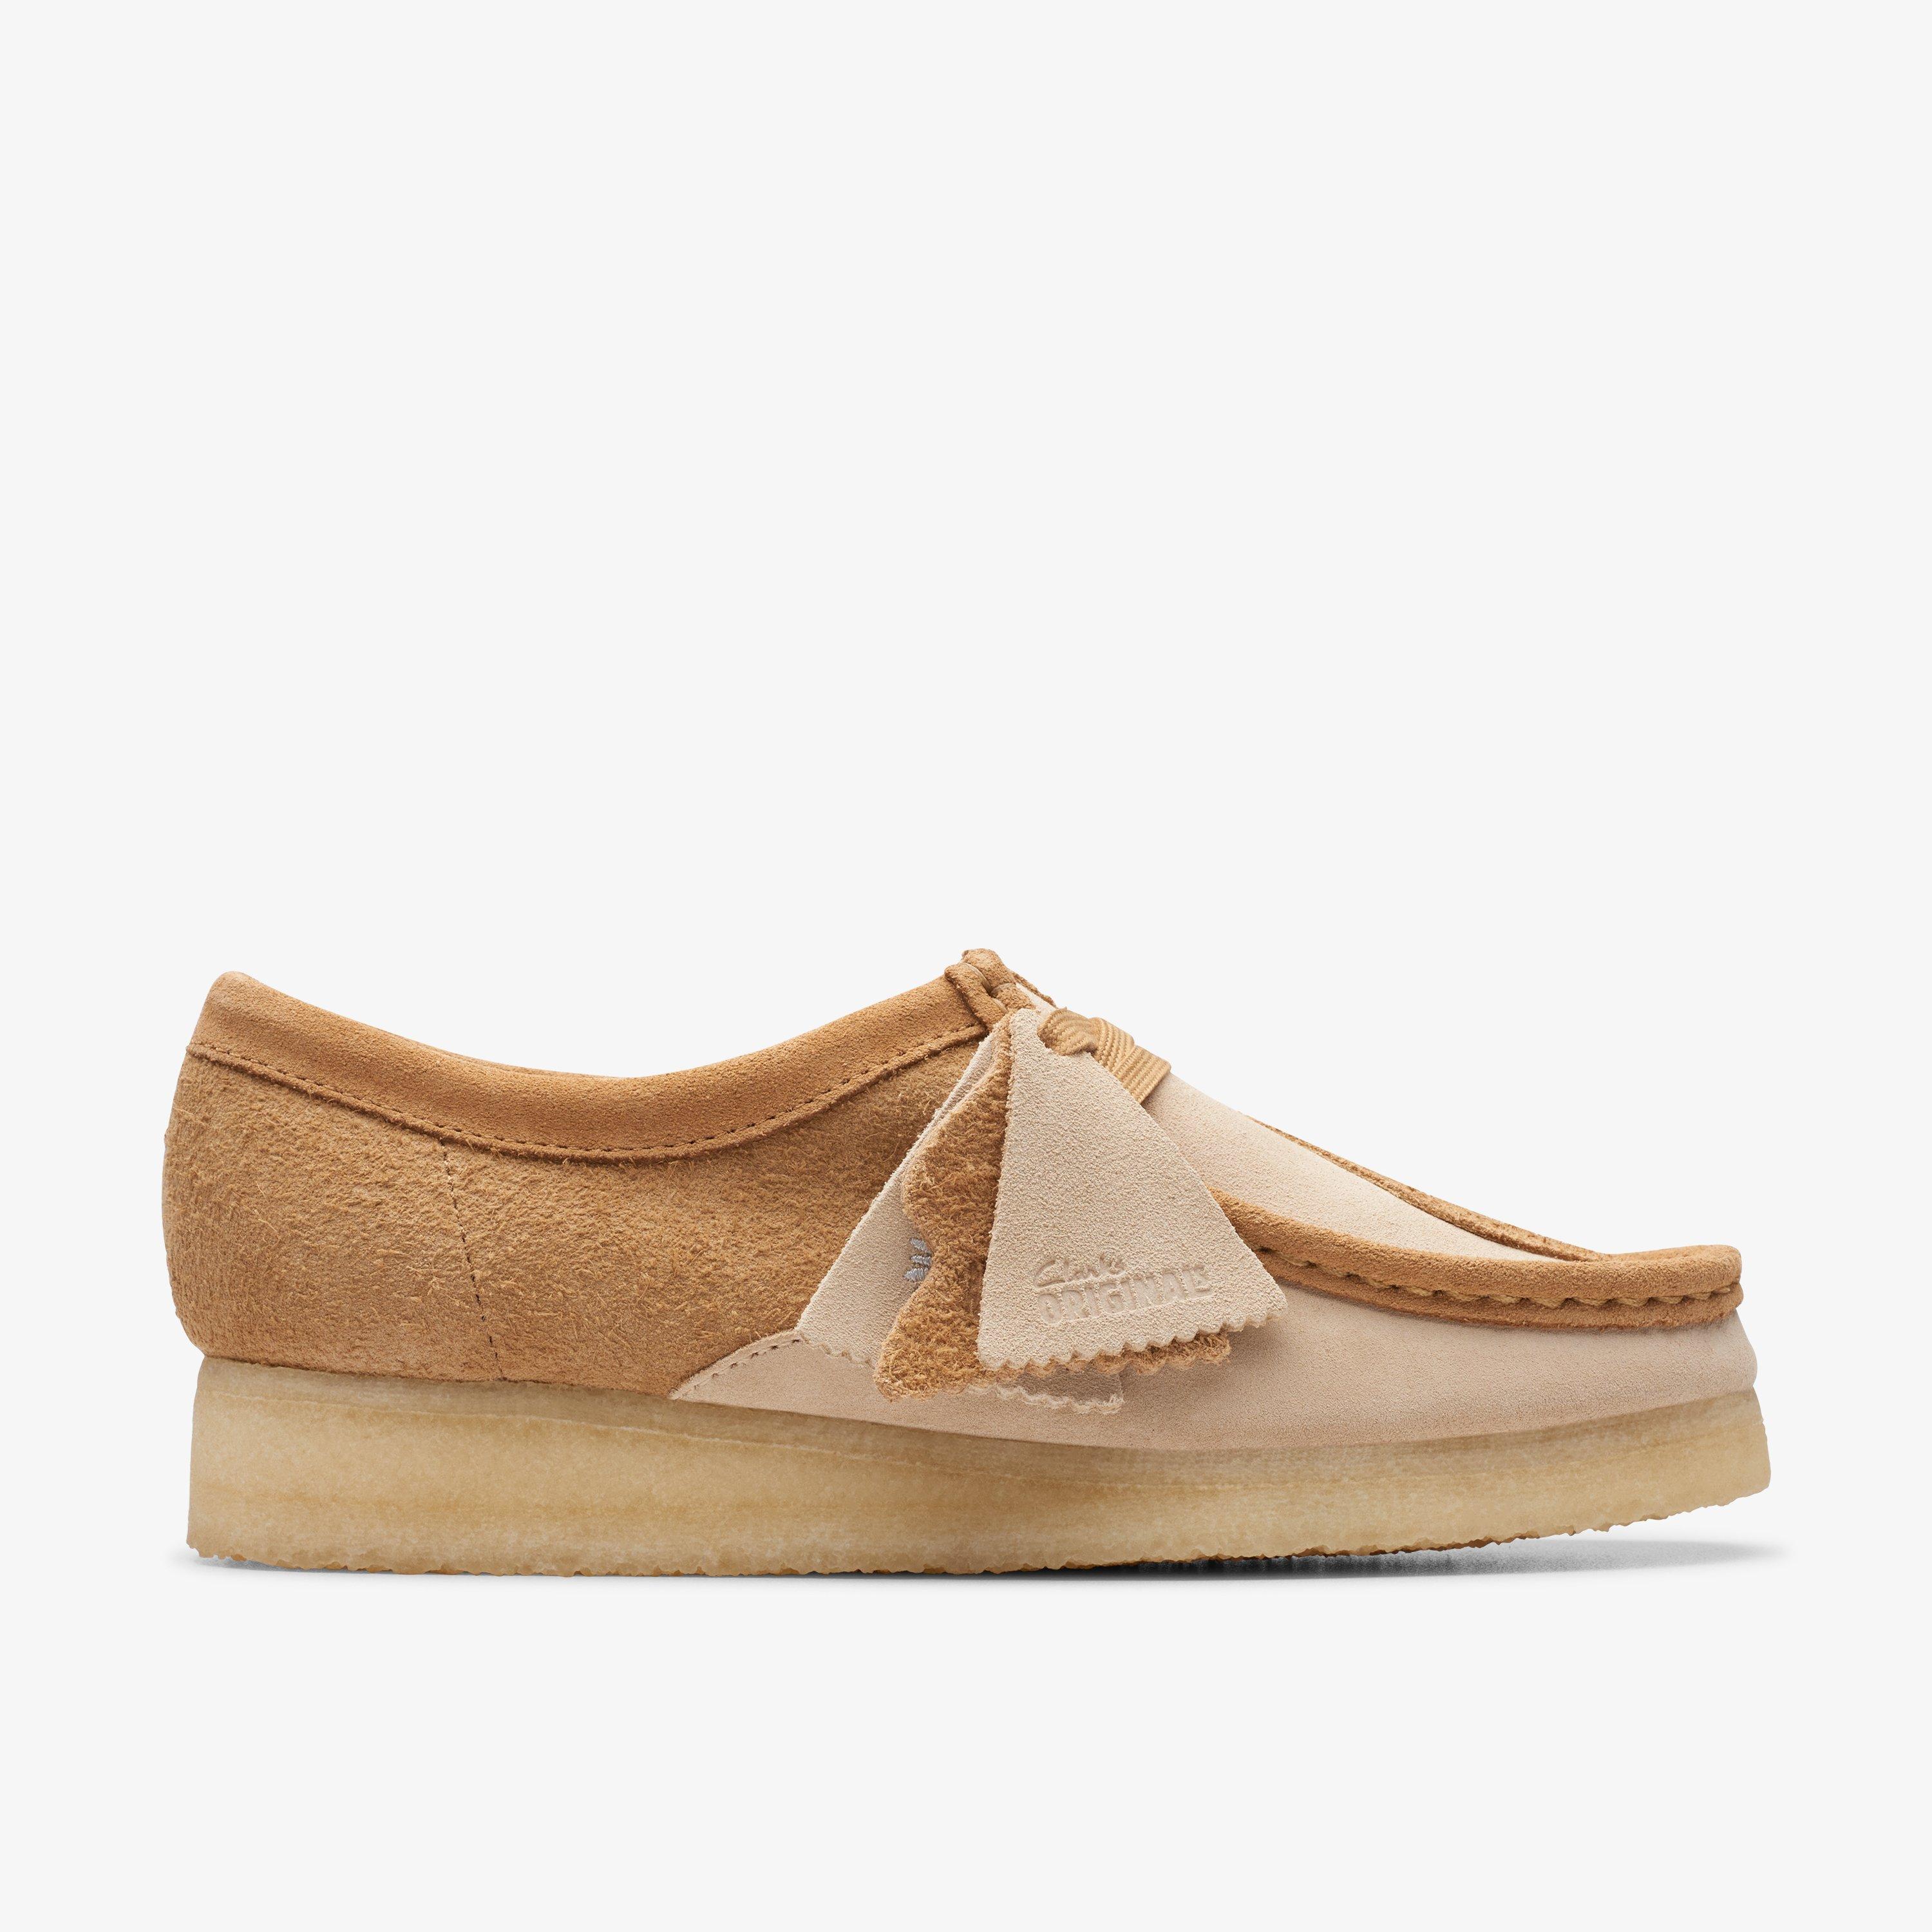 Originals Wallabees - Leather Wallabee Shoes